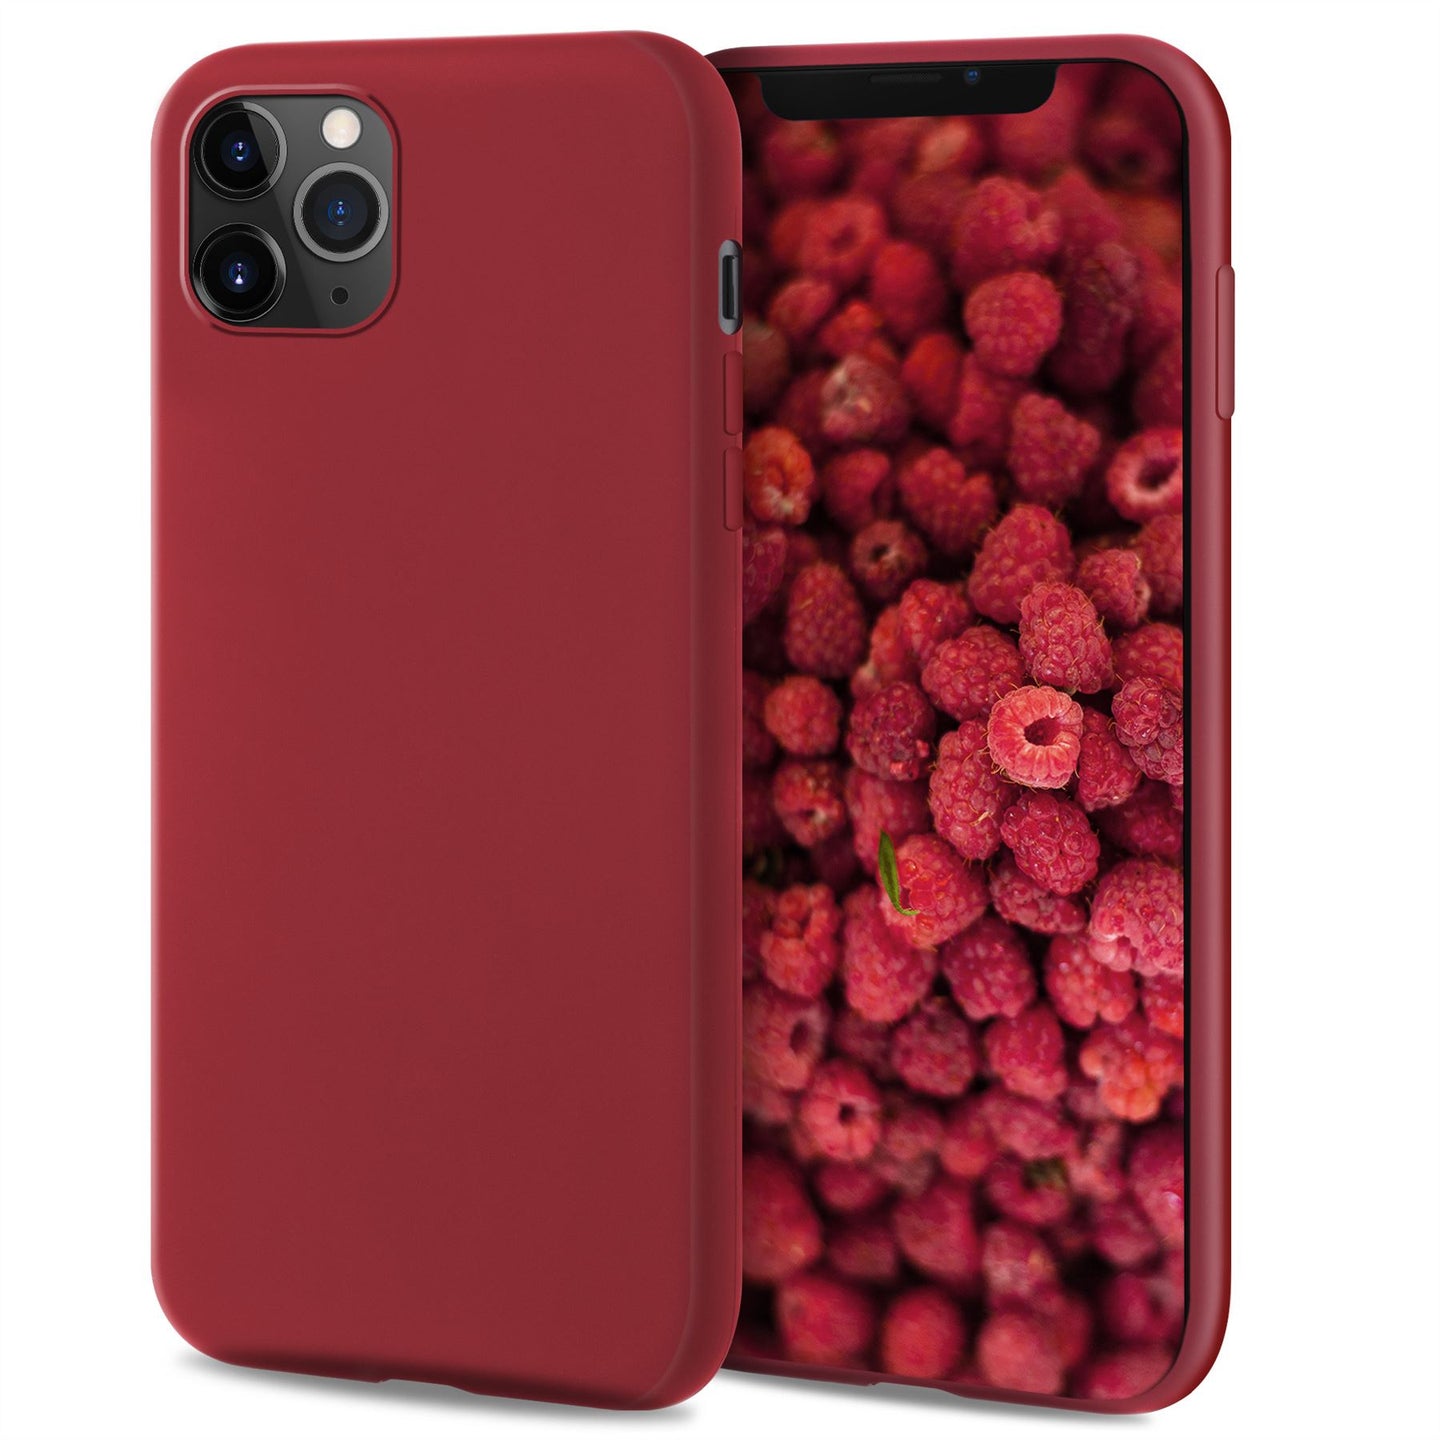 Moozy Lifestyle. Designed for iPhone 12, iPhone 12 Pro Case, Vintage Pink - Liquid Silicone Cover with Matte Finish and Soft Microfiber Lining